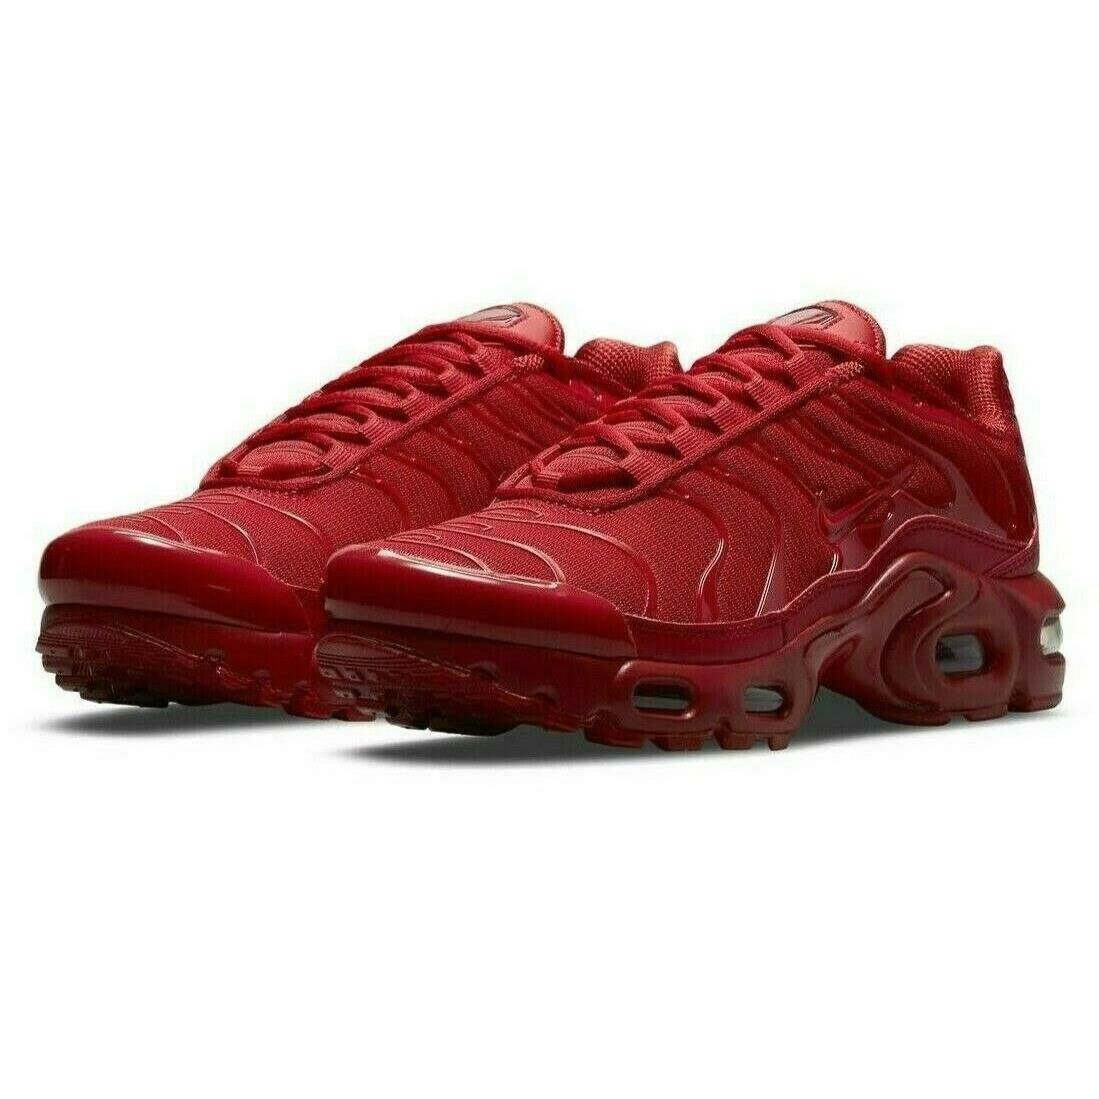 Nike Air Max Plus GS Womens Size 6.5 Sneaker Shoes DM8877 600 Red sz 5Y